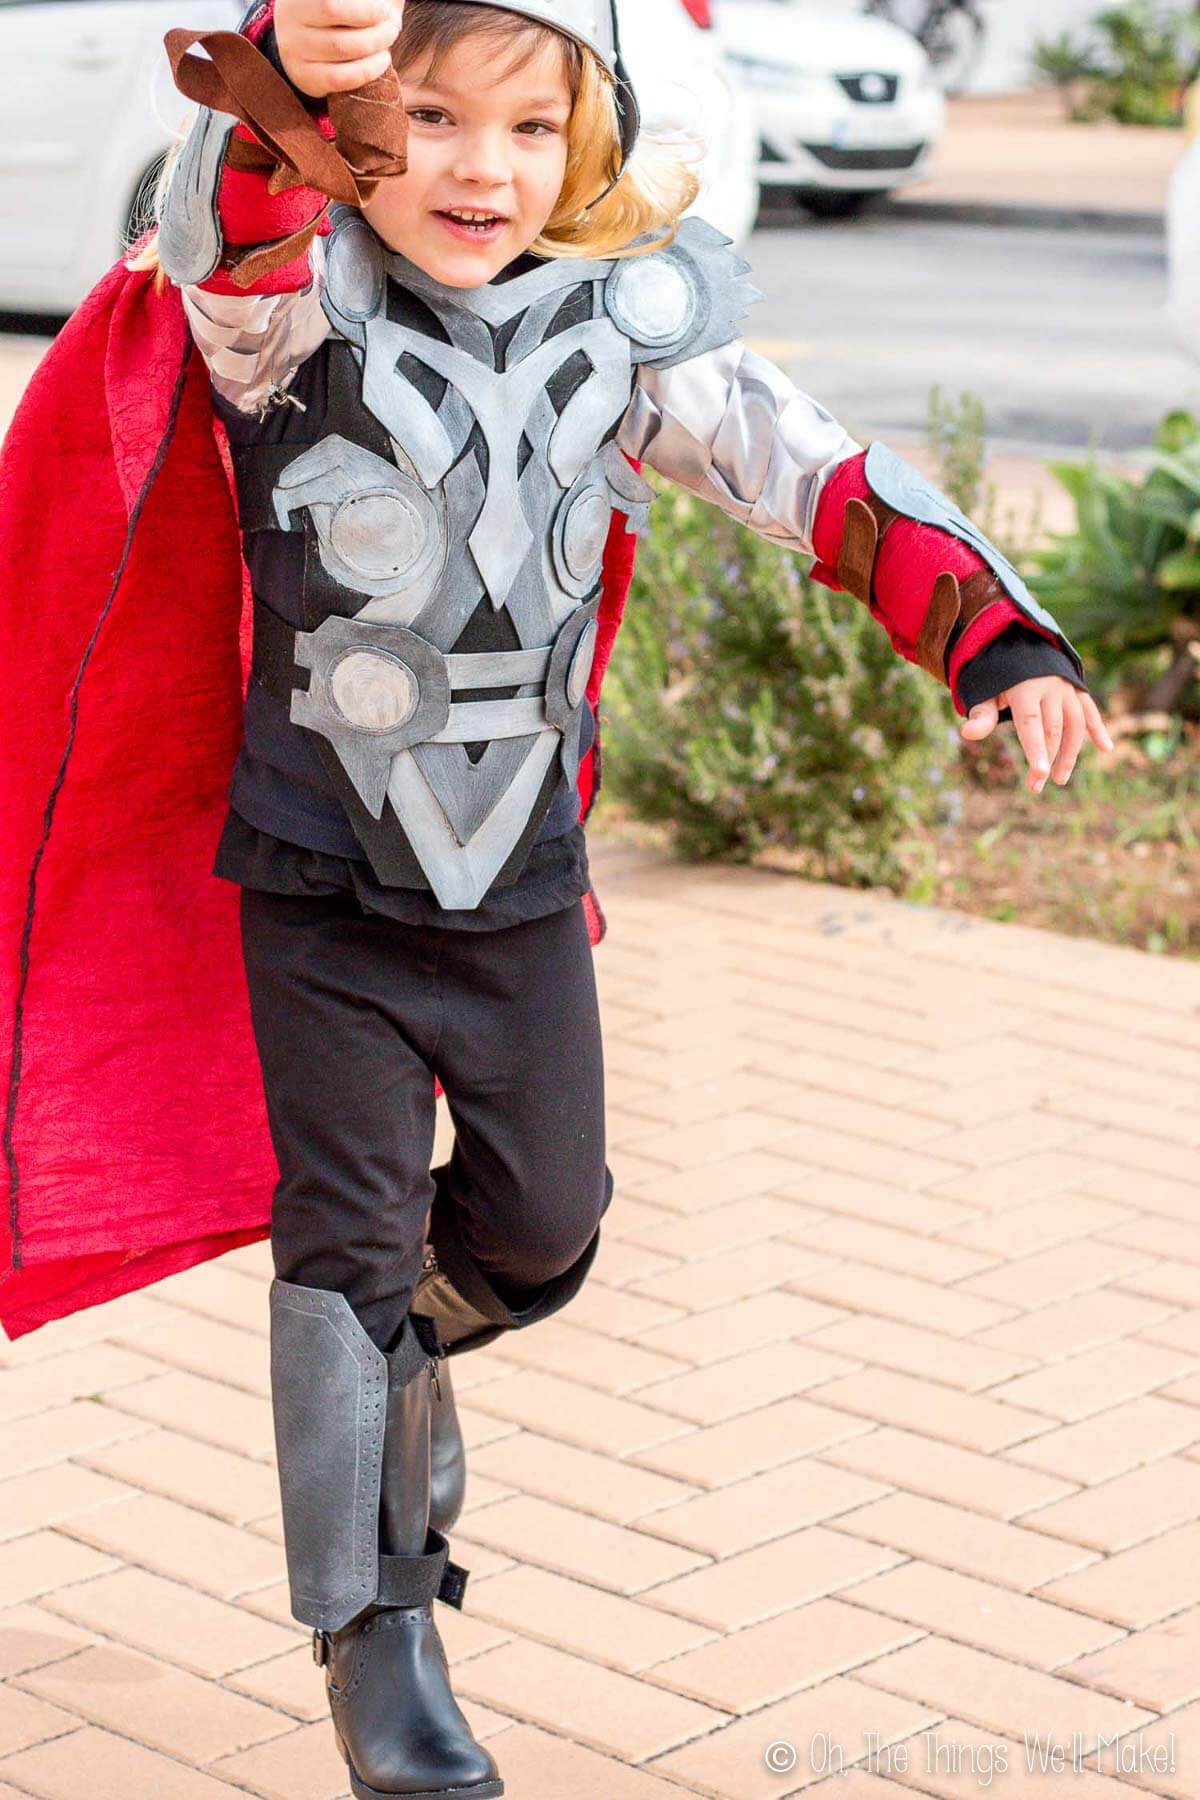 Boy dressed in Thor costume with hammer raised as if ready to strike